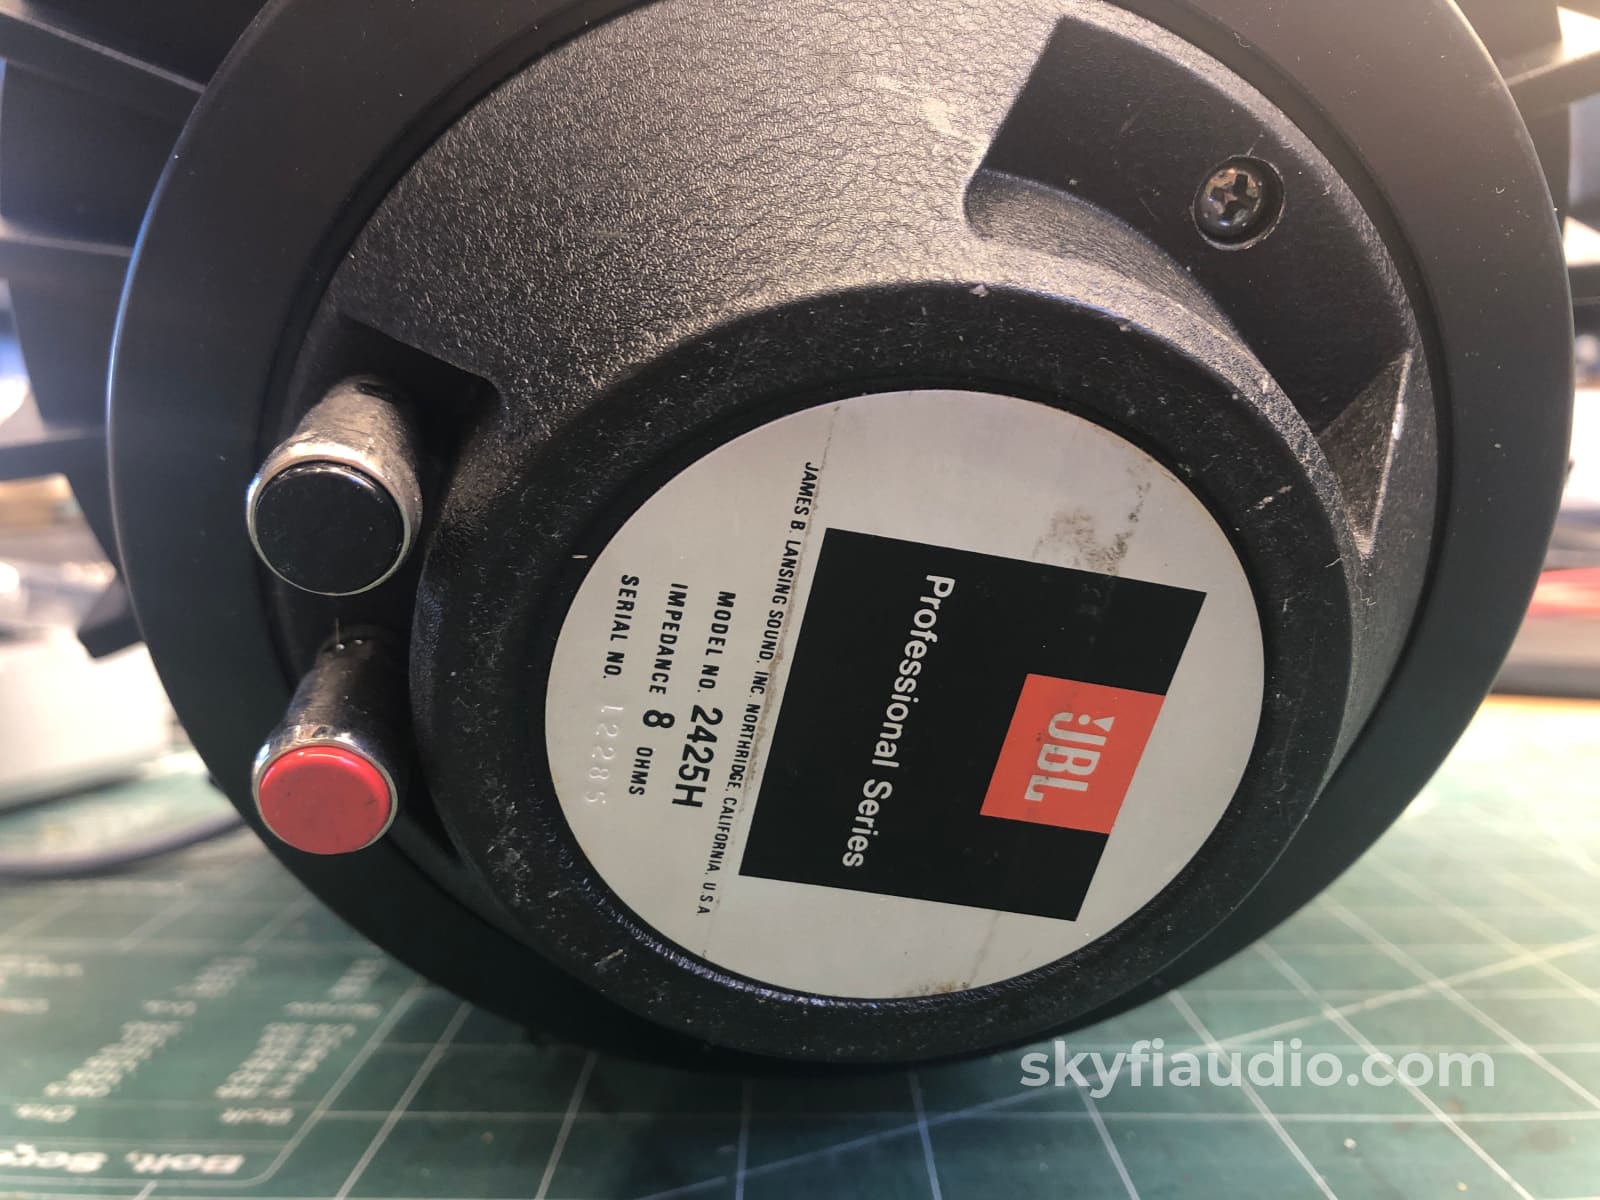 Urei 801B Studio Drivers - 15 Coaxial Time Aligned With Jbl Horns Perfect For Project Or Speakers